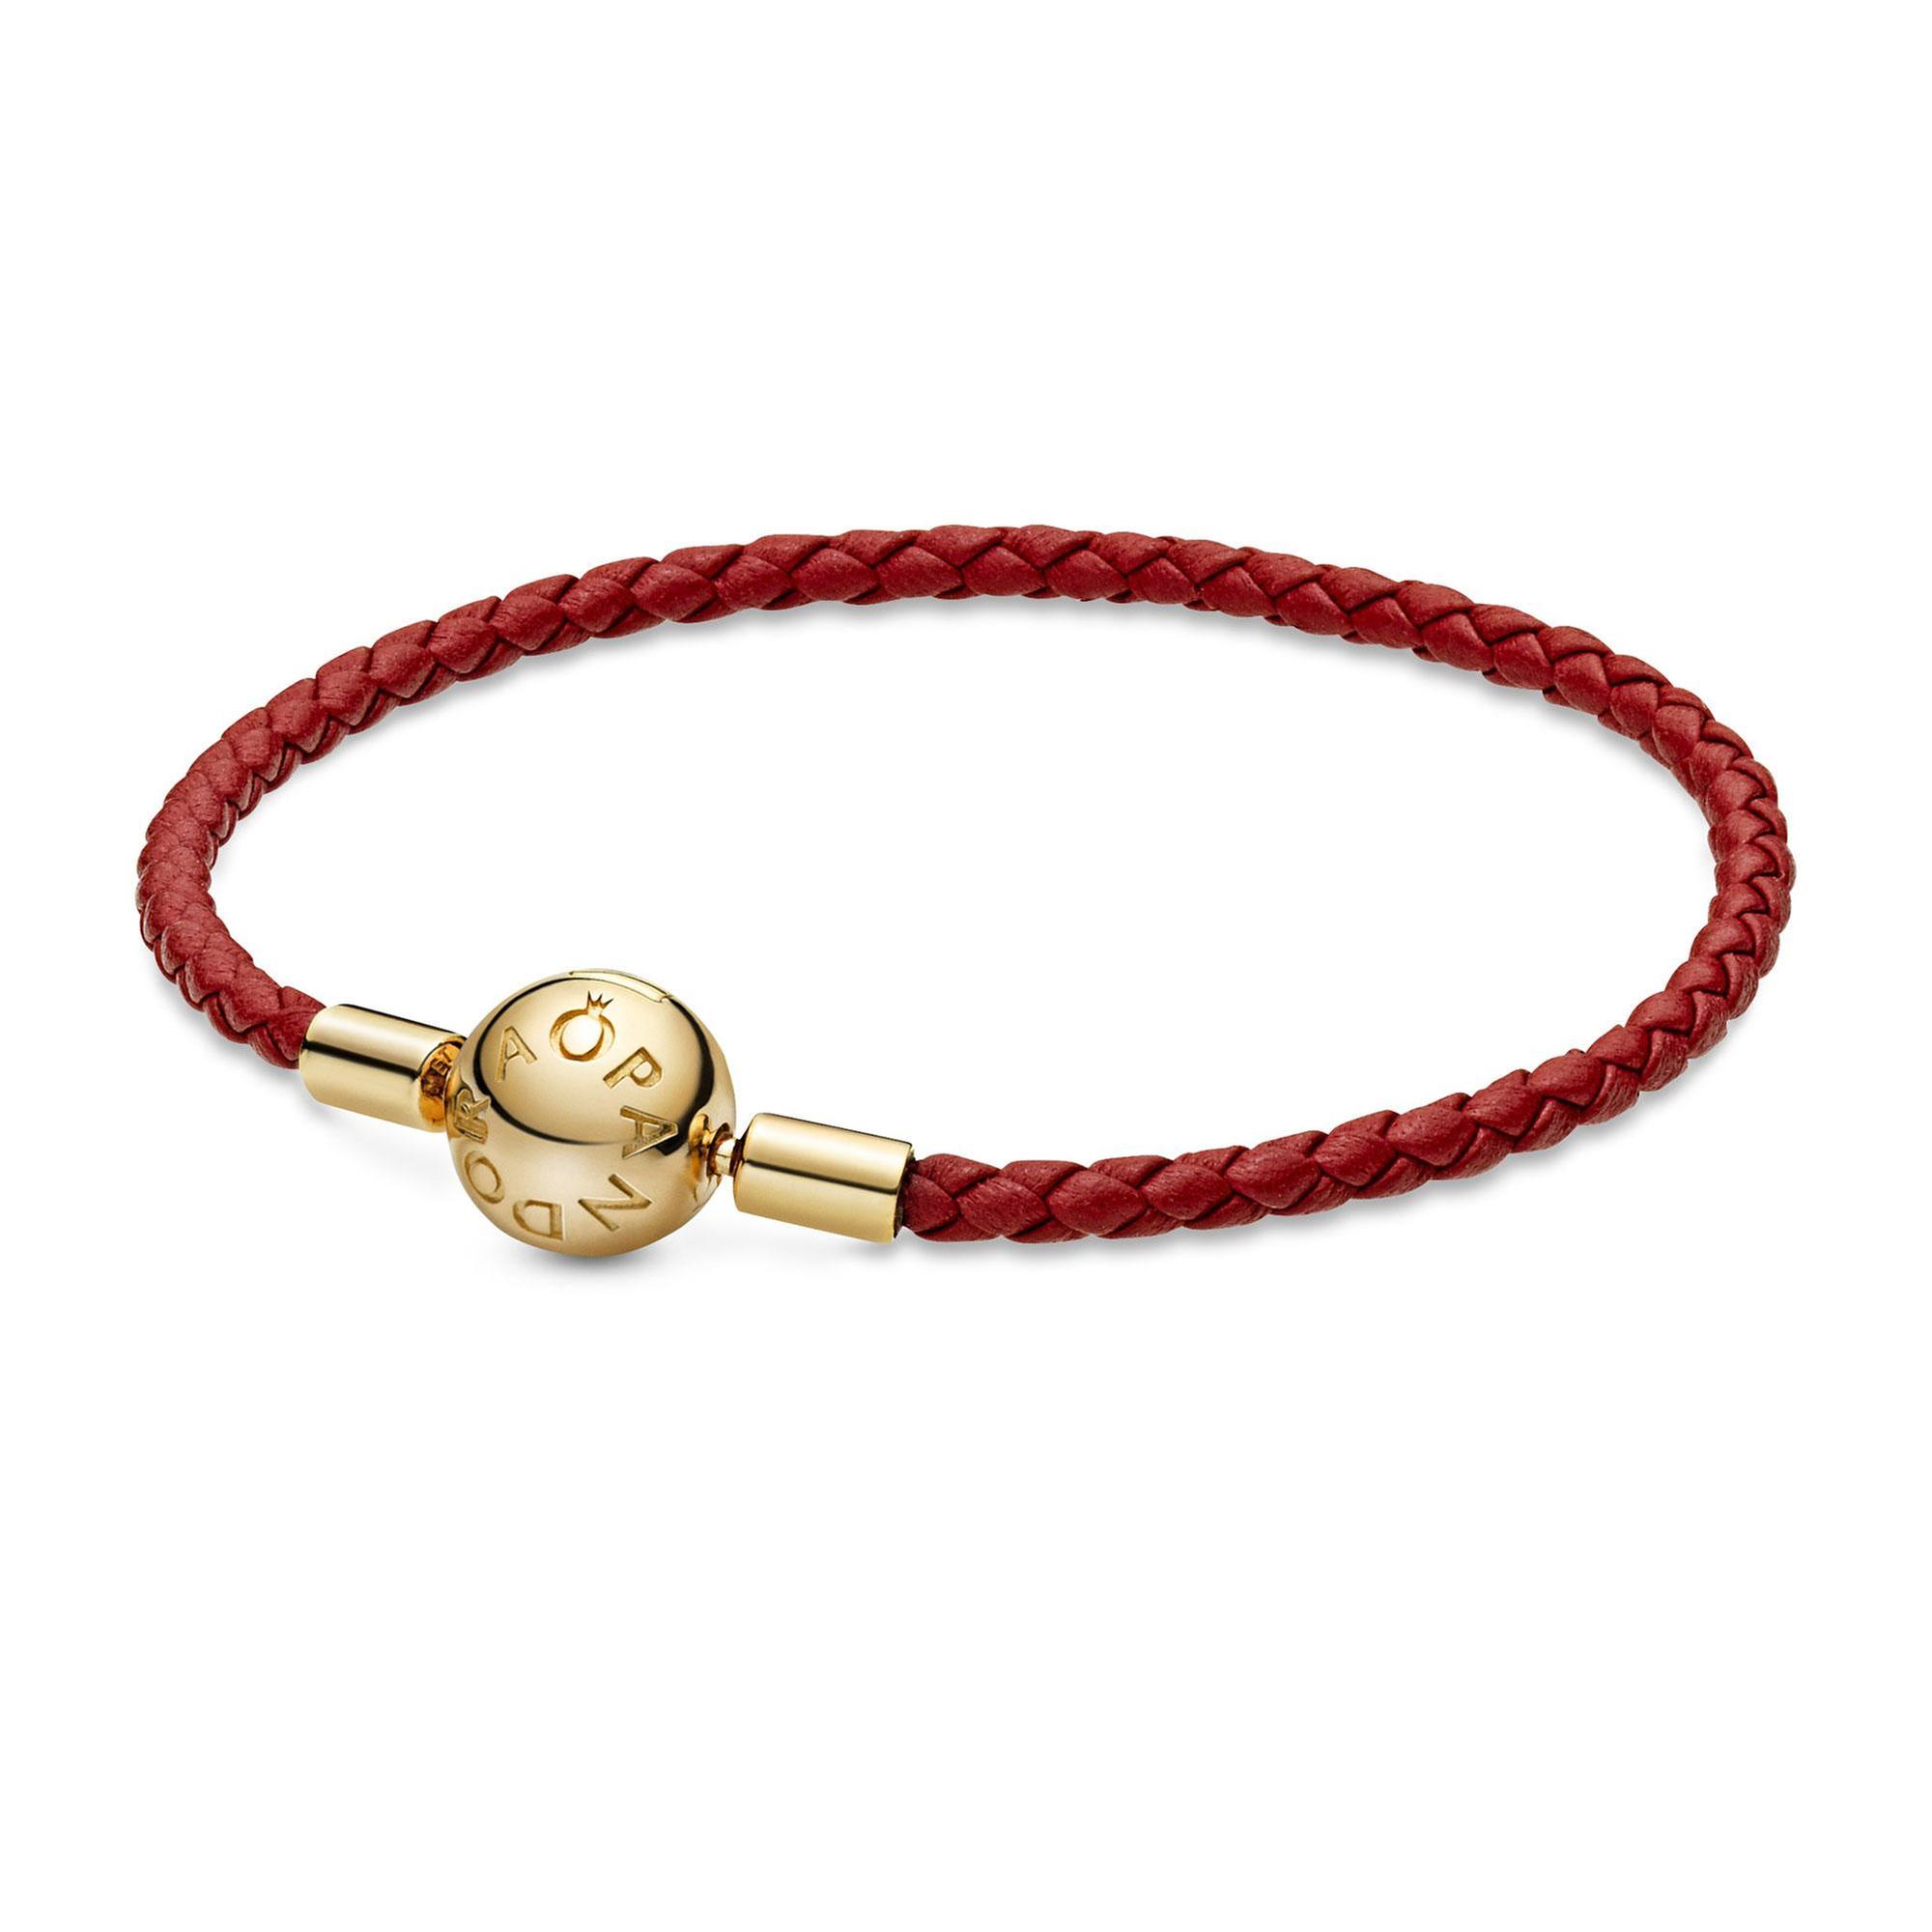 Pandora Moments Red Woven Leather Bracelet - 6.9in